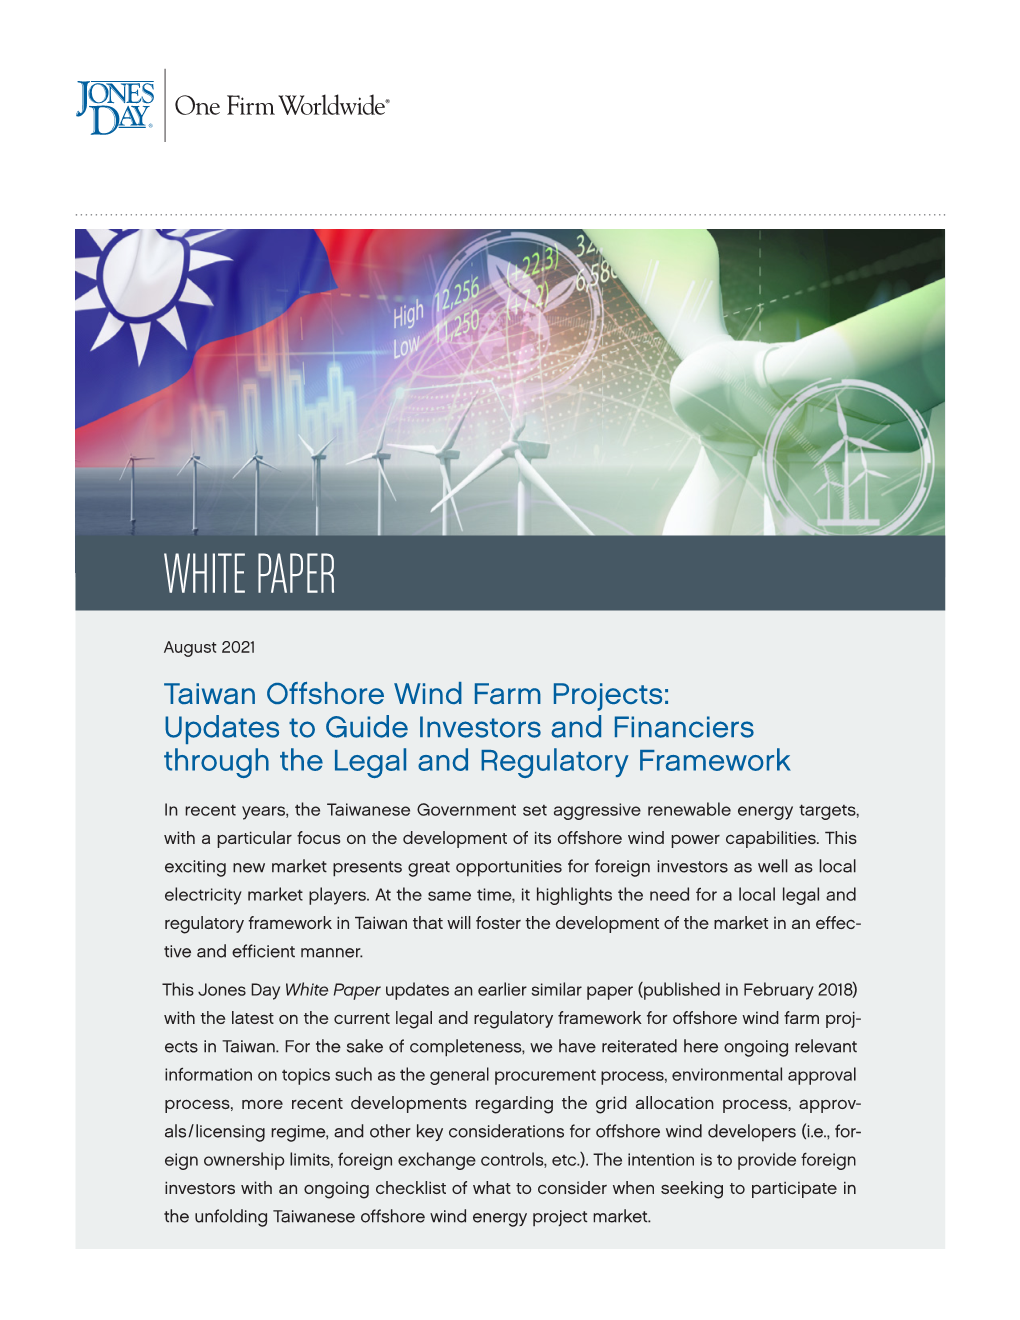 Taiwan Offshore Wind Farm Projects: Updates to Guide Investors and Financiers Through the Legal and Regulatory Framework